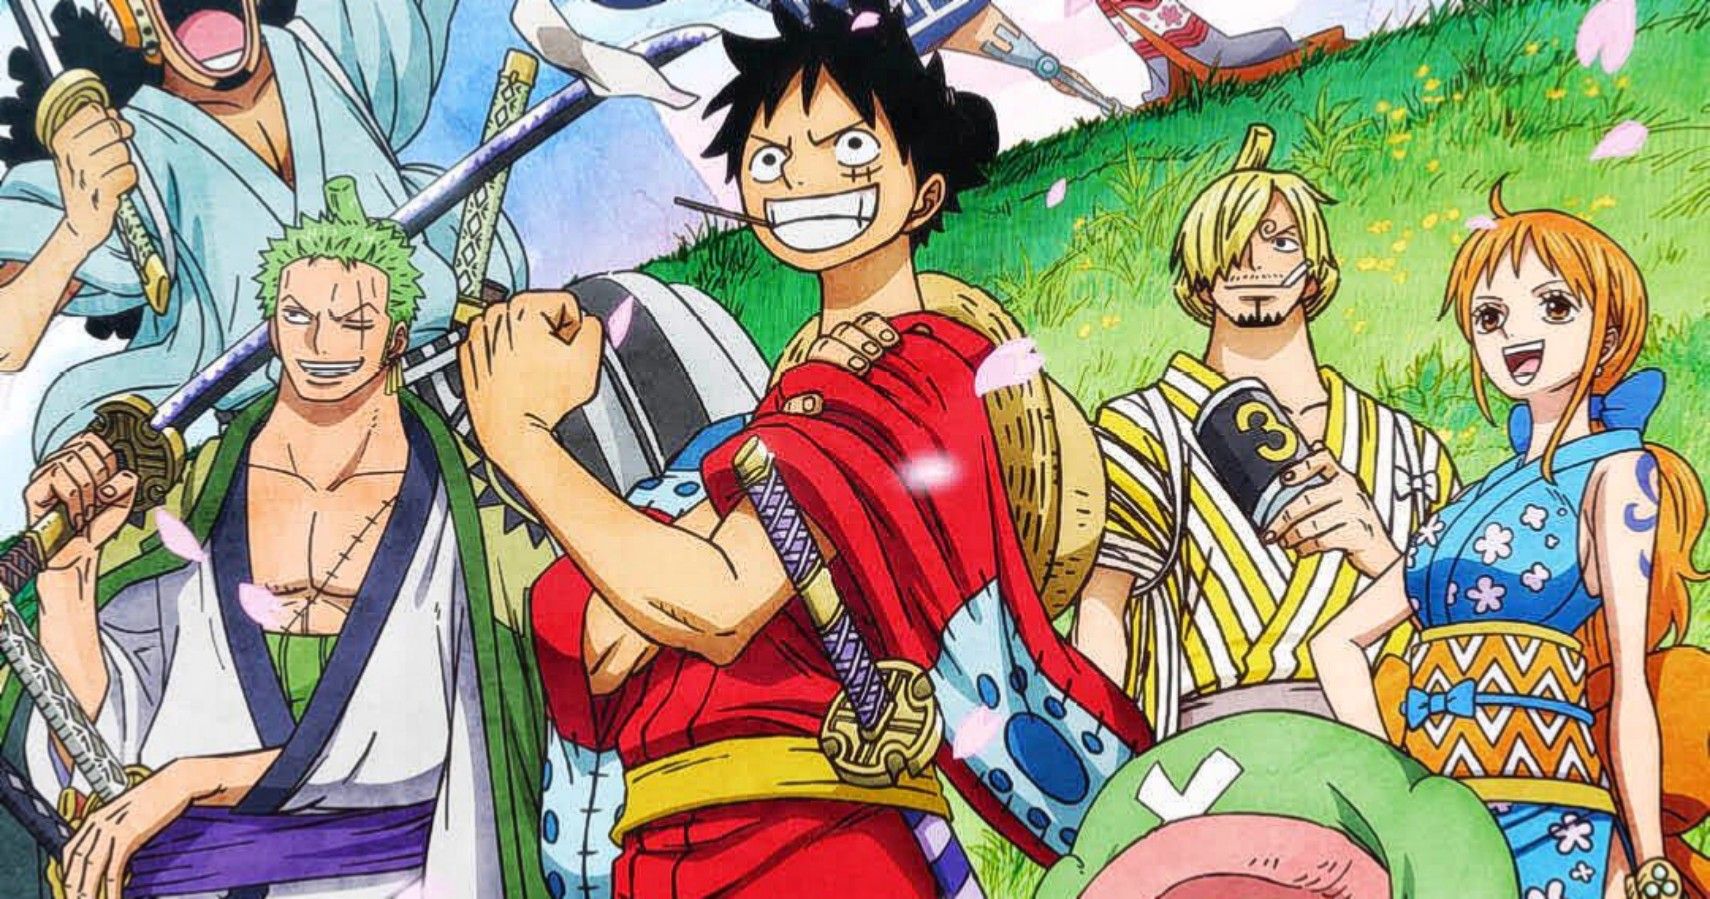 One Piece Episode 991 Anime Release Date, Recap, And SpoilersRecap and Spoilers